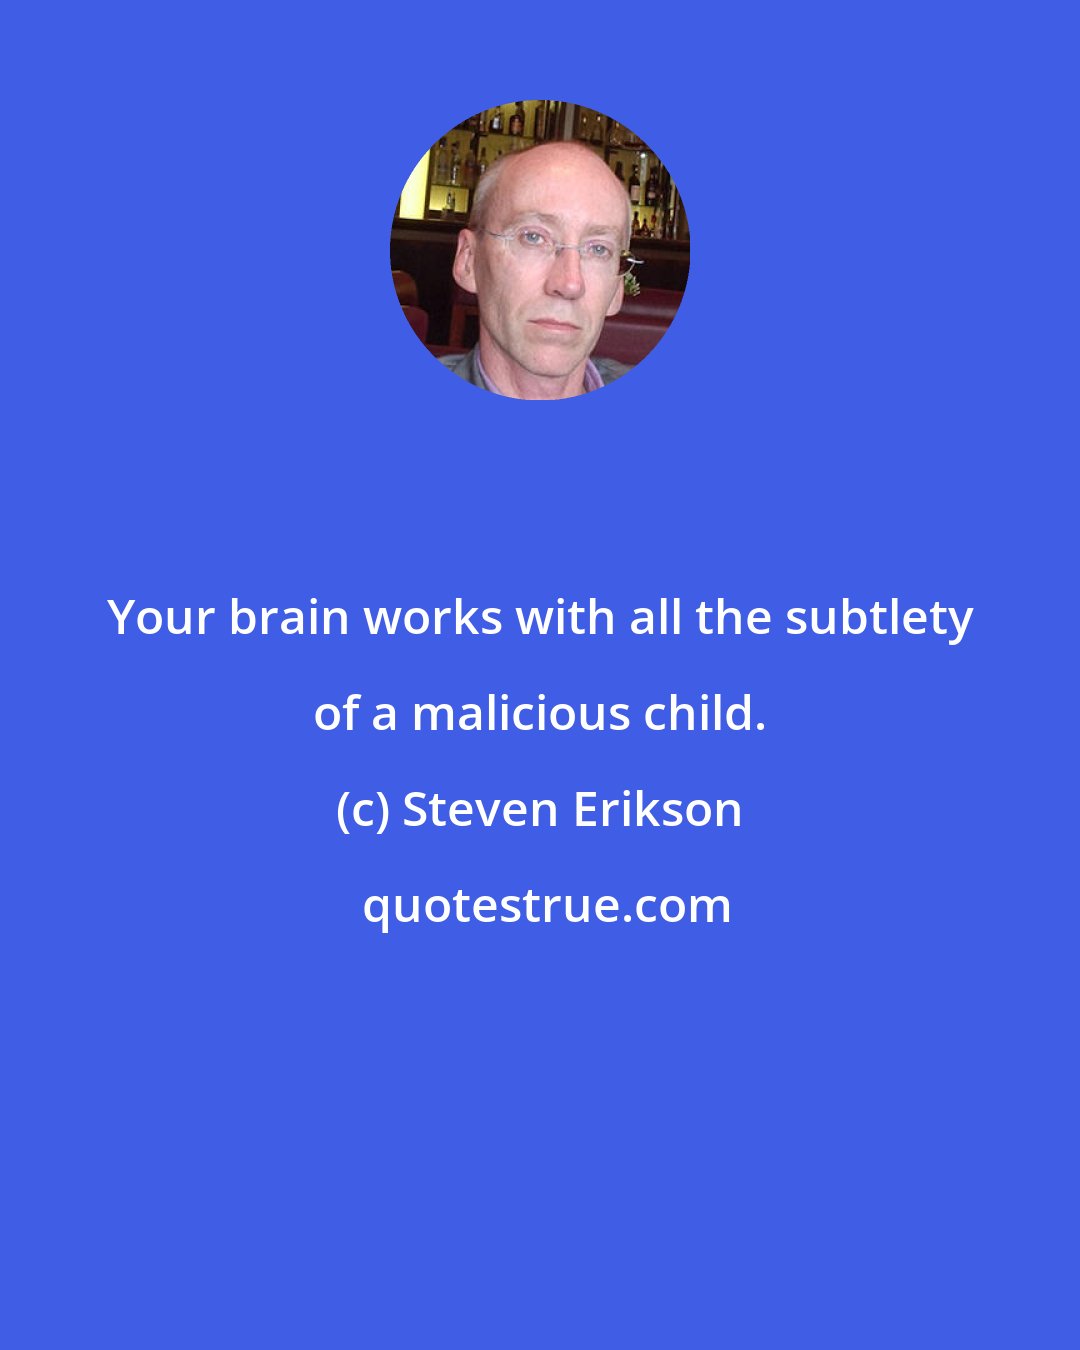 Steven Erikson: Your brain works with all the subtlety of a malicious child.